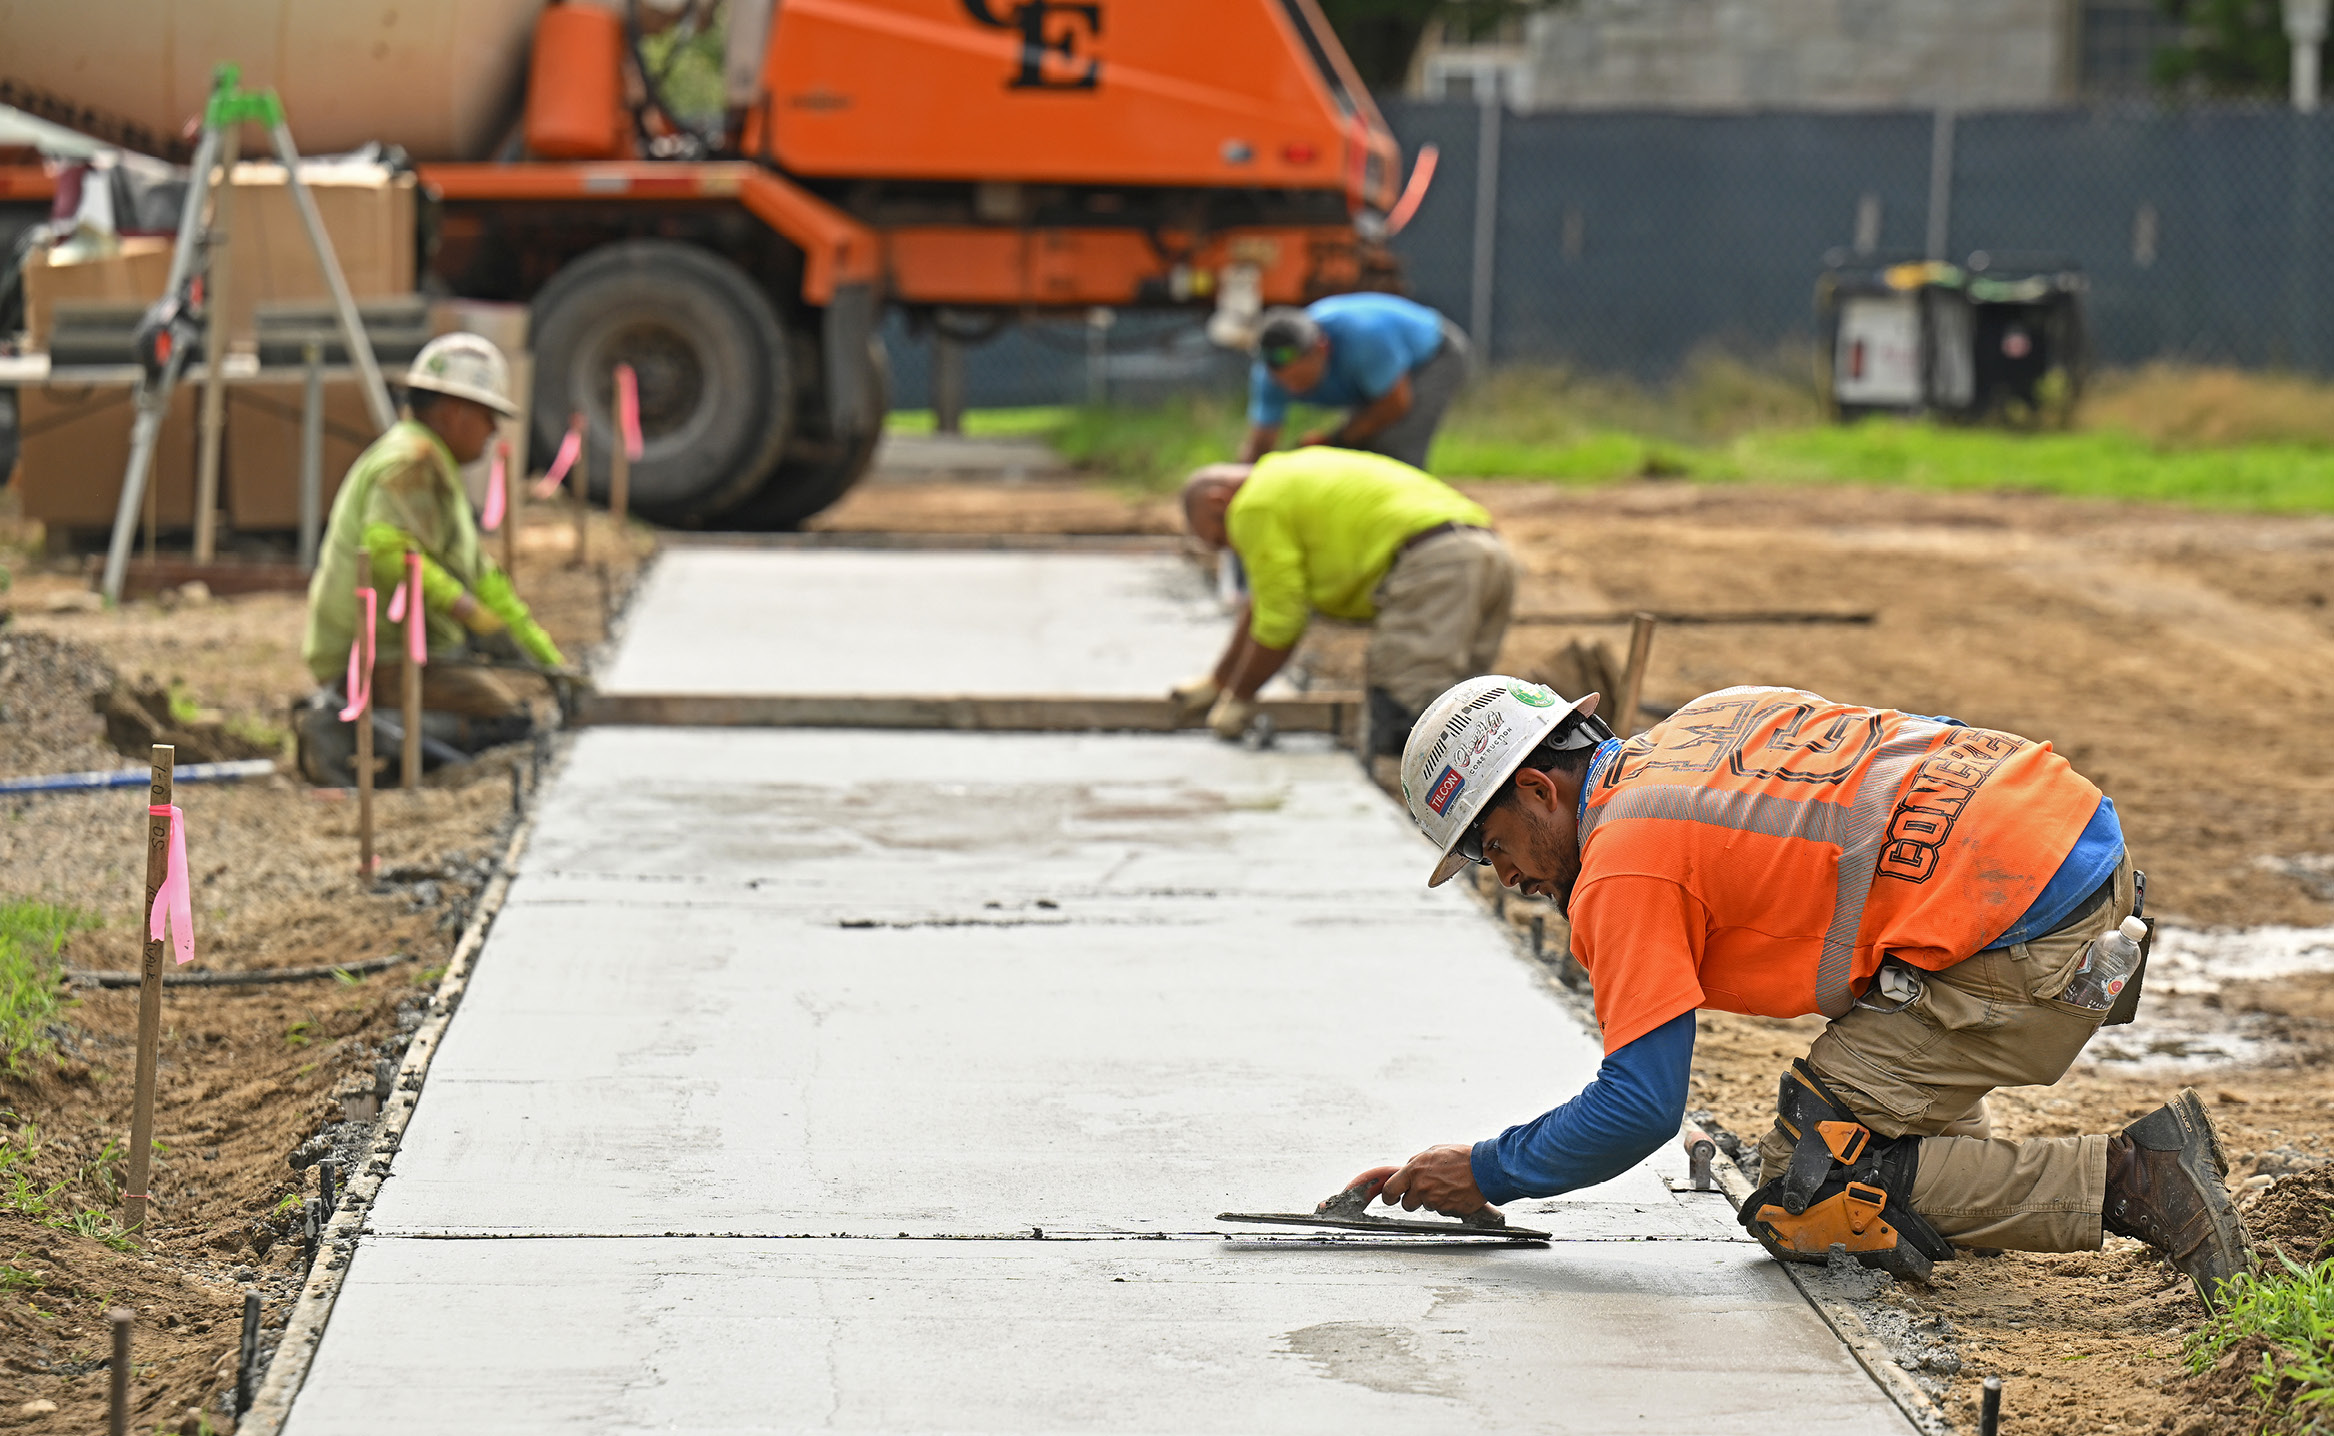 Workers level fresh cement on a campus sidewalk